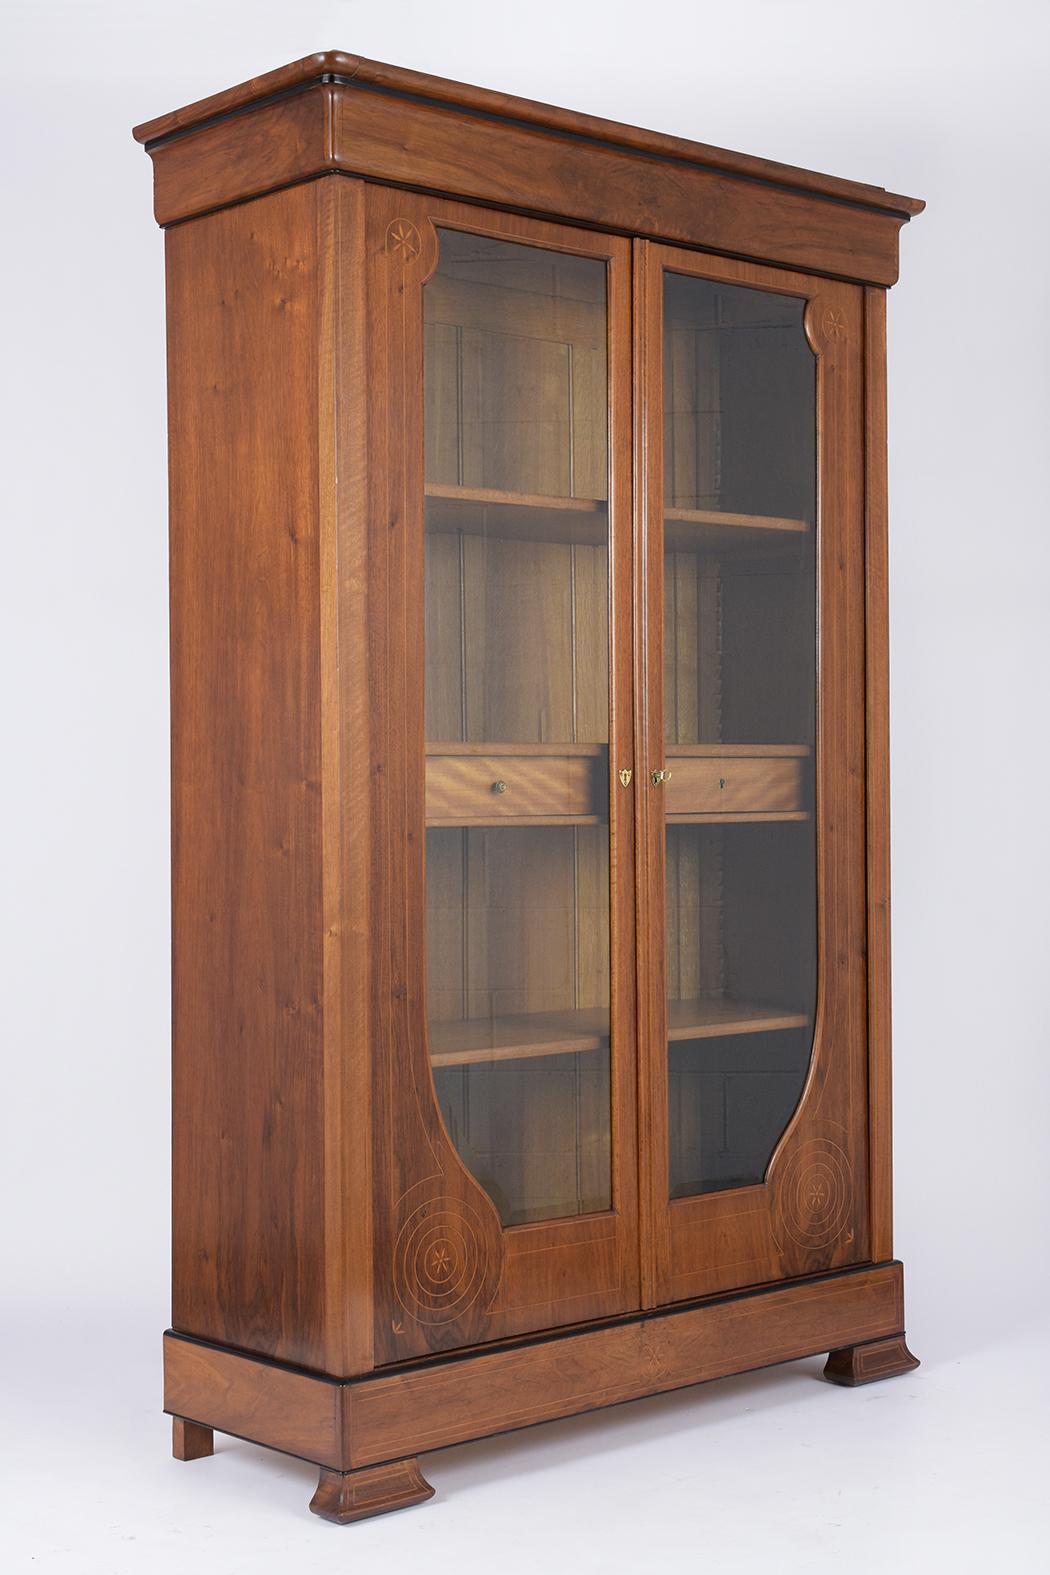 This French 19th century Empire bookcase has been completed restored, is made out of walnut wood with its original walnut color and has a newly waxed and polish patina finish. This bookcase features carved molding along the top/bottom, two large